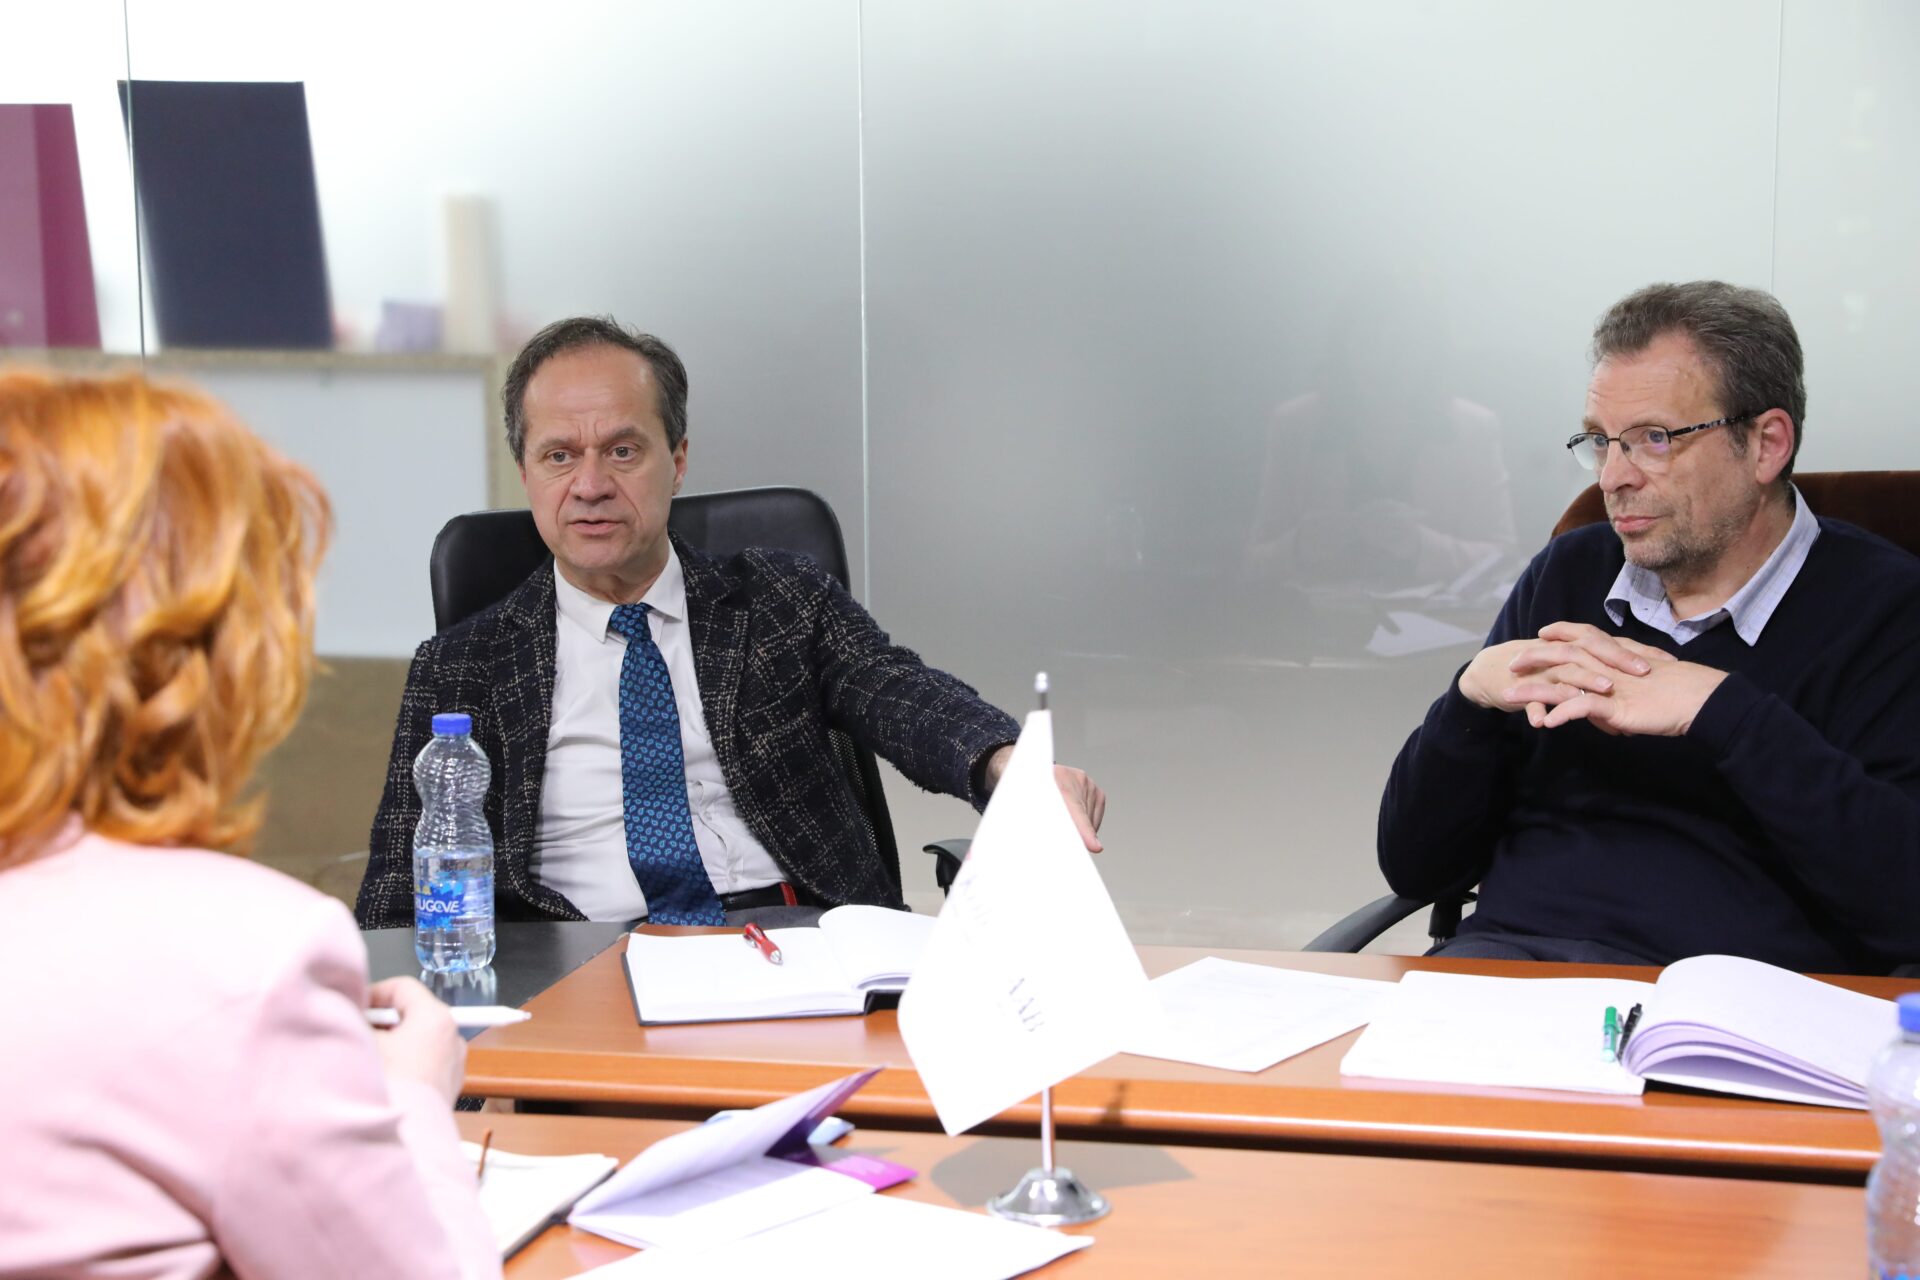 Representatives of Lille University from France visit AAB College